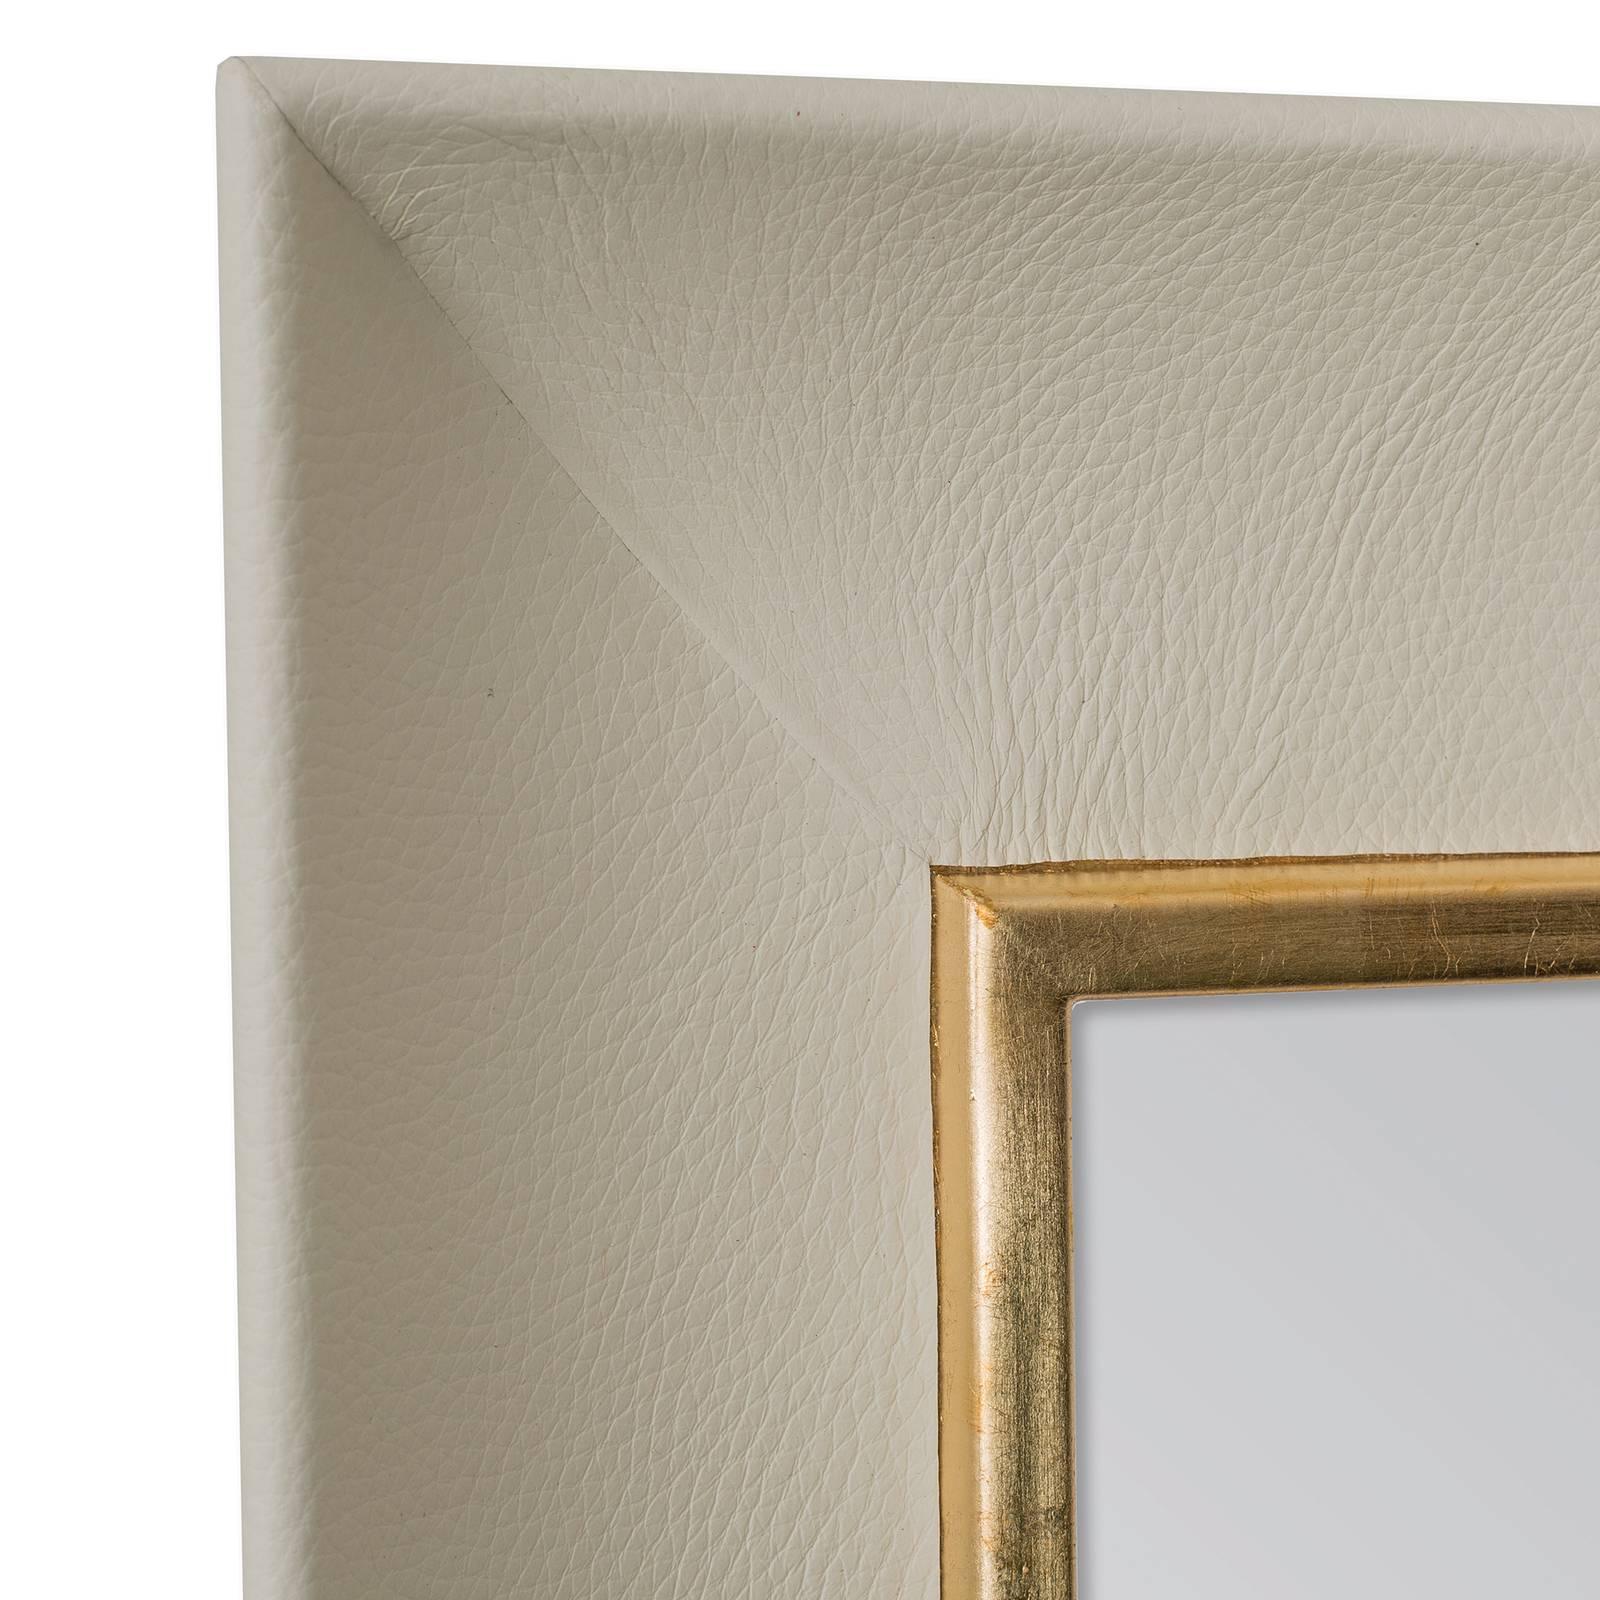 Combining the different textures of metal and leather, this mirror is a stunning modern accent to a living room, bedroom, or entryway. Its minimalist frame is dressed in fine and soft genuine grain leather in a off white color (also available in